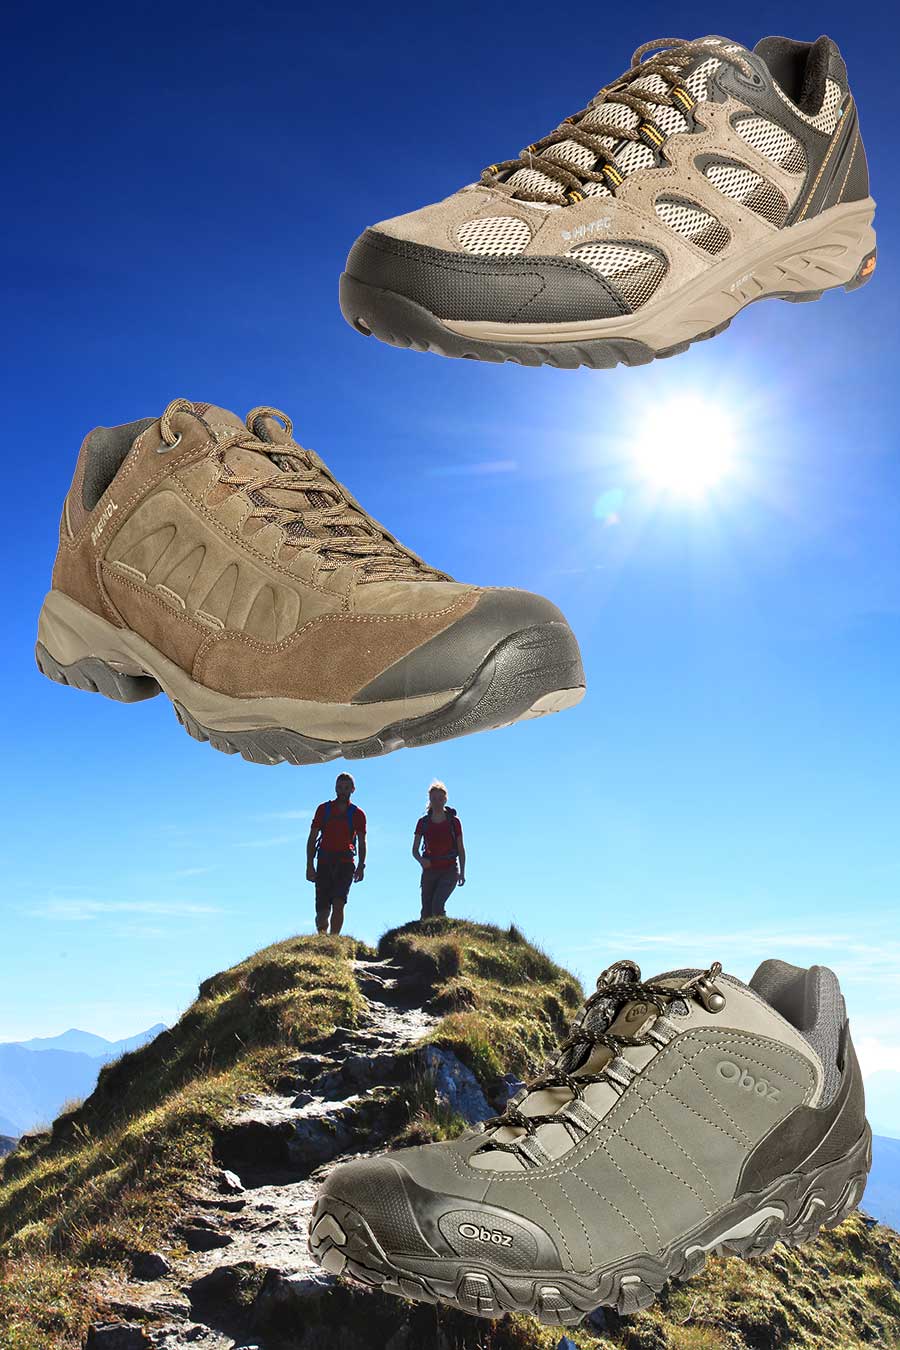 Best for budget: Trail shoes review 